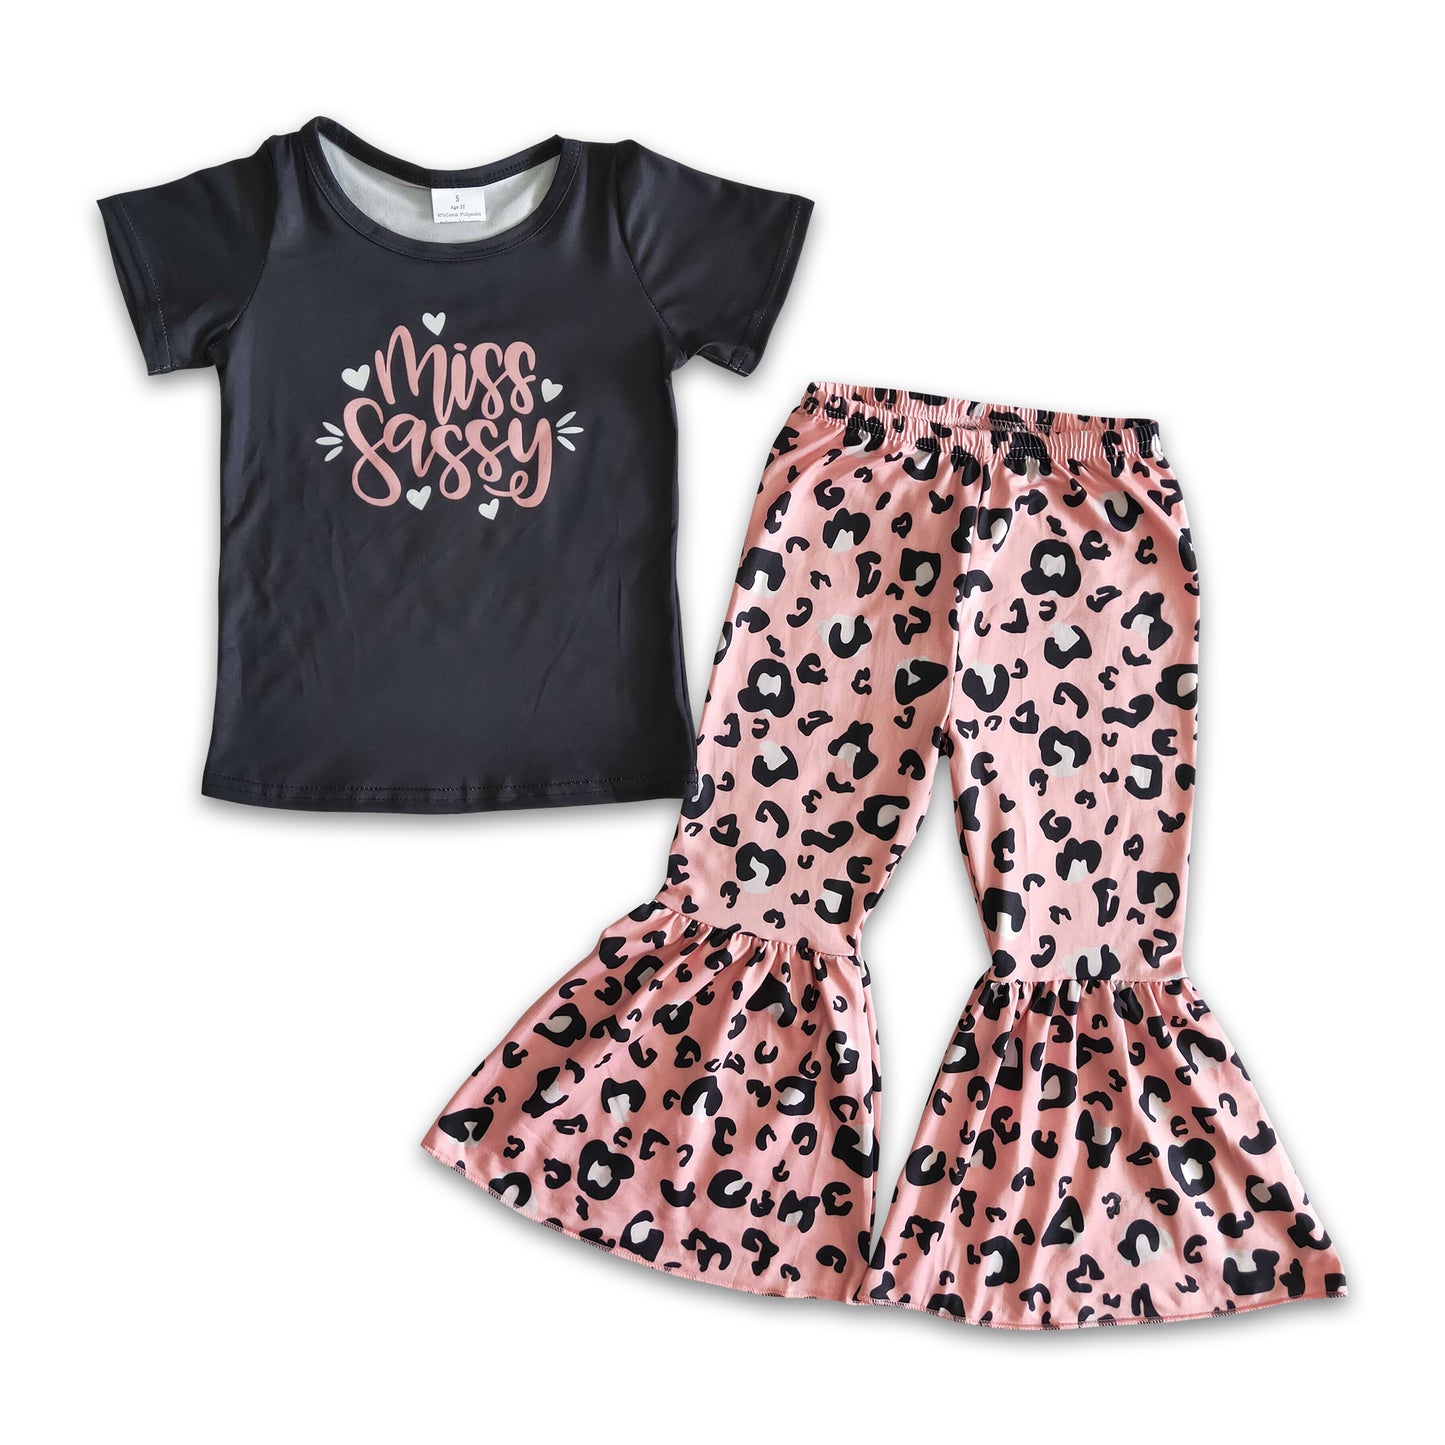 Miss Sassy Top Pink Leopard Bells Pants Outfit